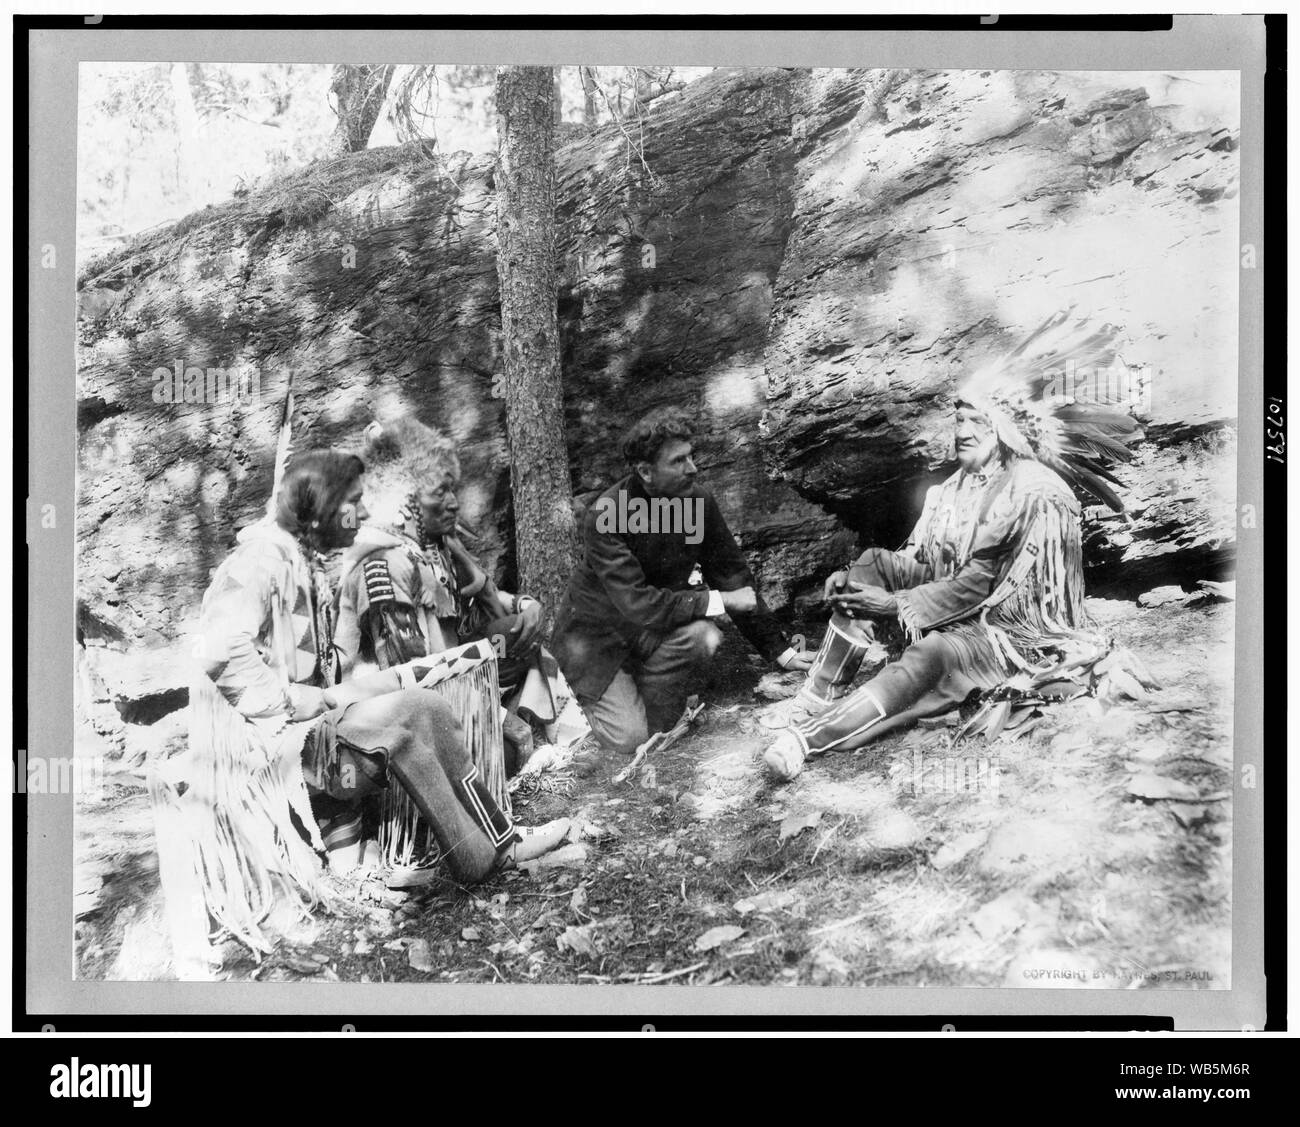 Ernest Thompson Seton, with three Blackfeet Indians, demonstrating how to start a fire using a bow and a stick, rocks and trees in background Abstract/medium: 1 photographic print. Stock Photo